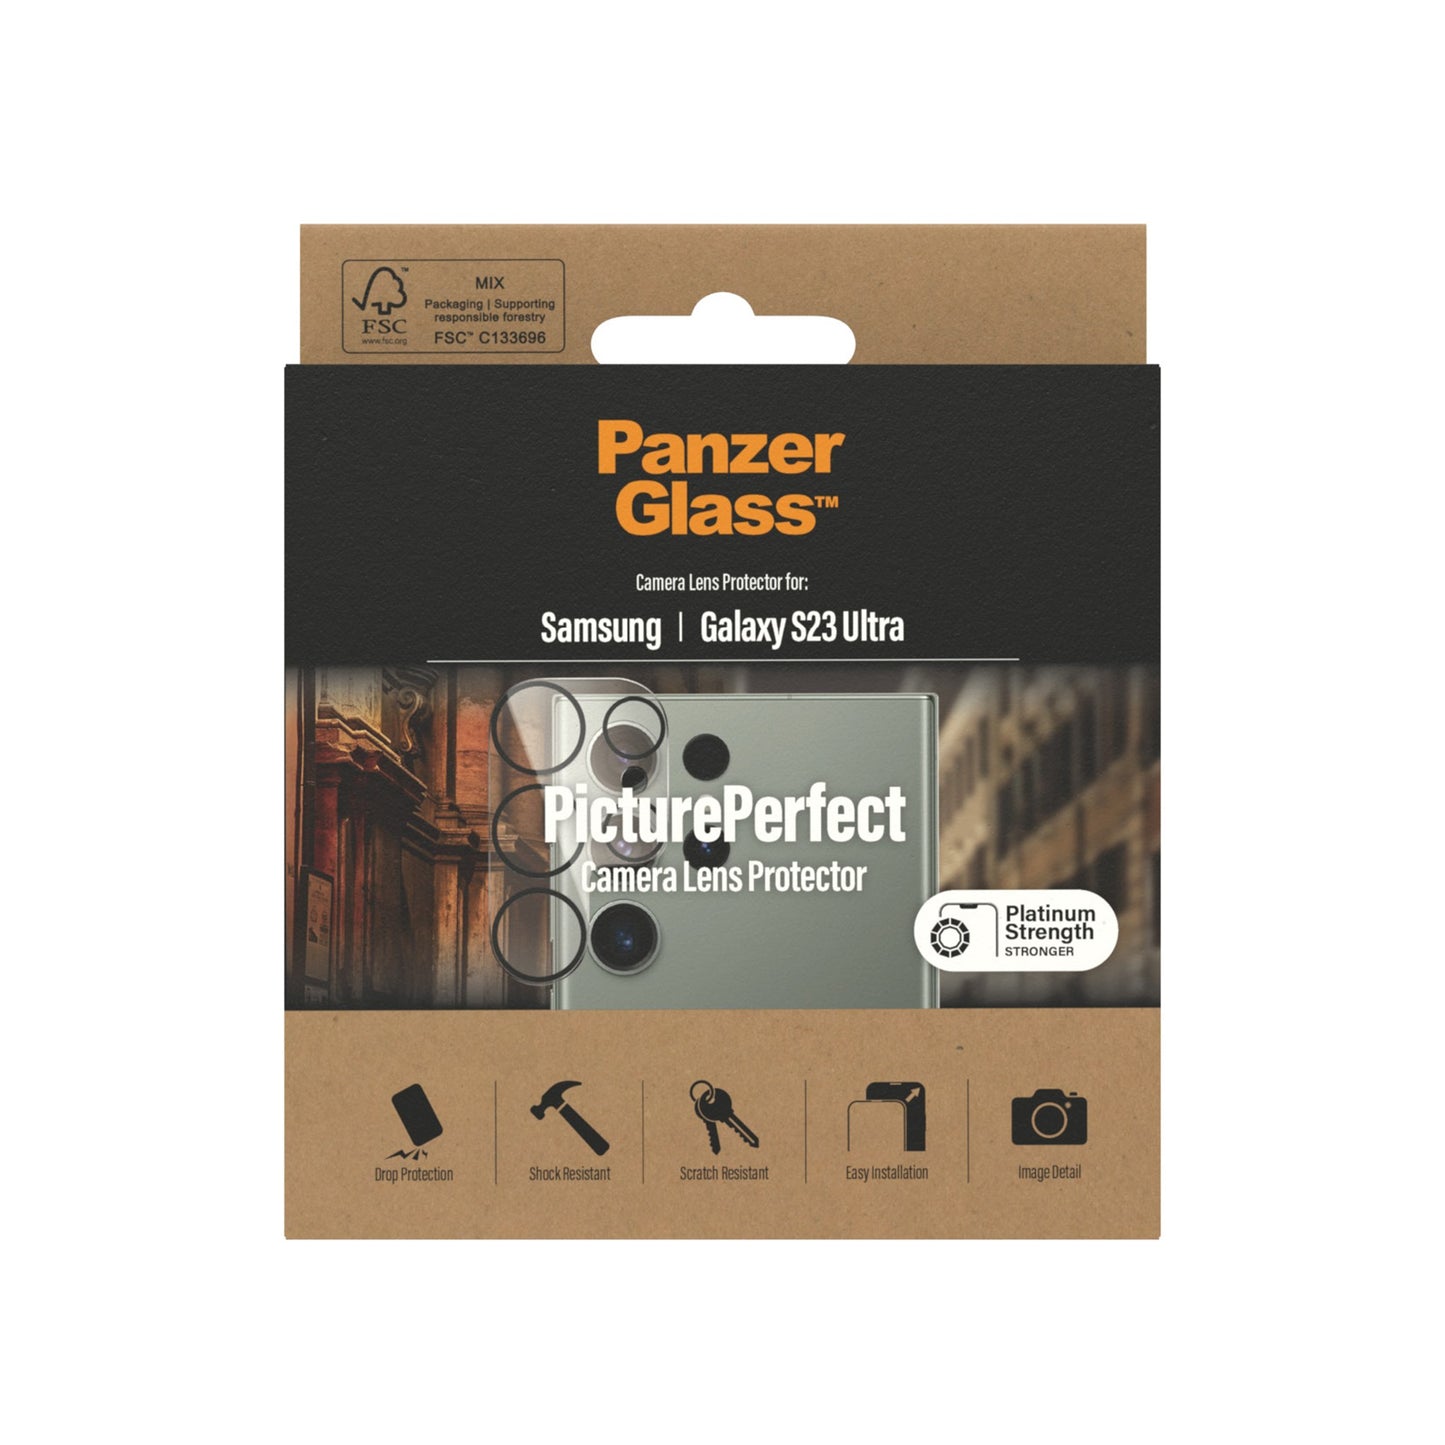 PanzerGlass™ PicturePerfect Camera Lens Protector Samsung Galaxy S23 Ultra 3